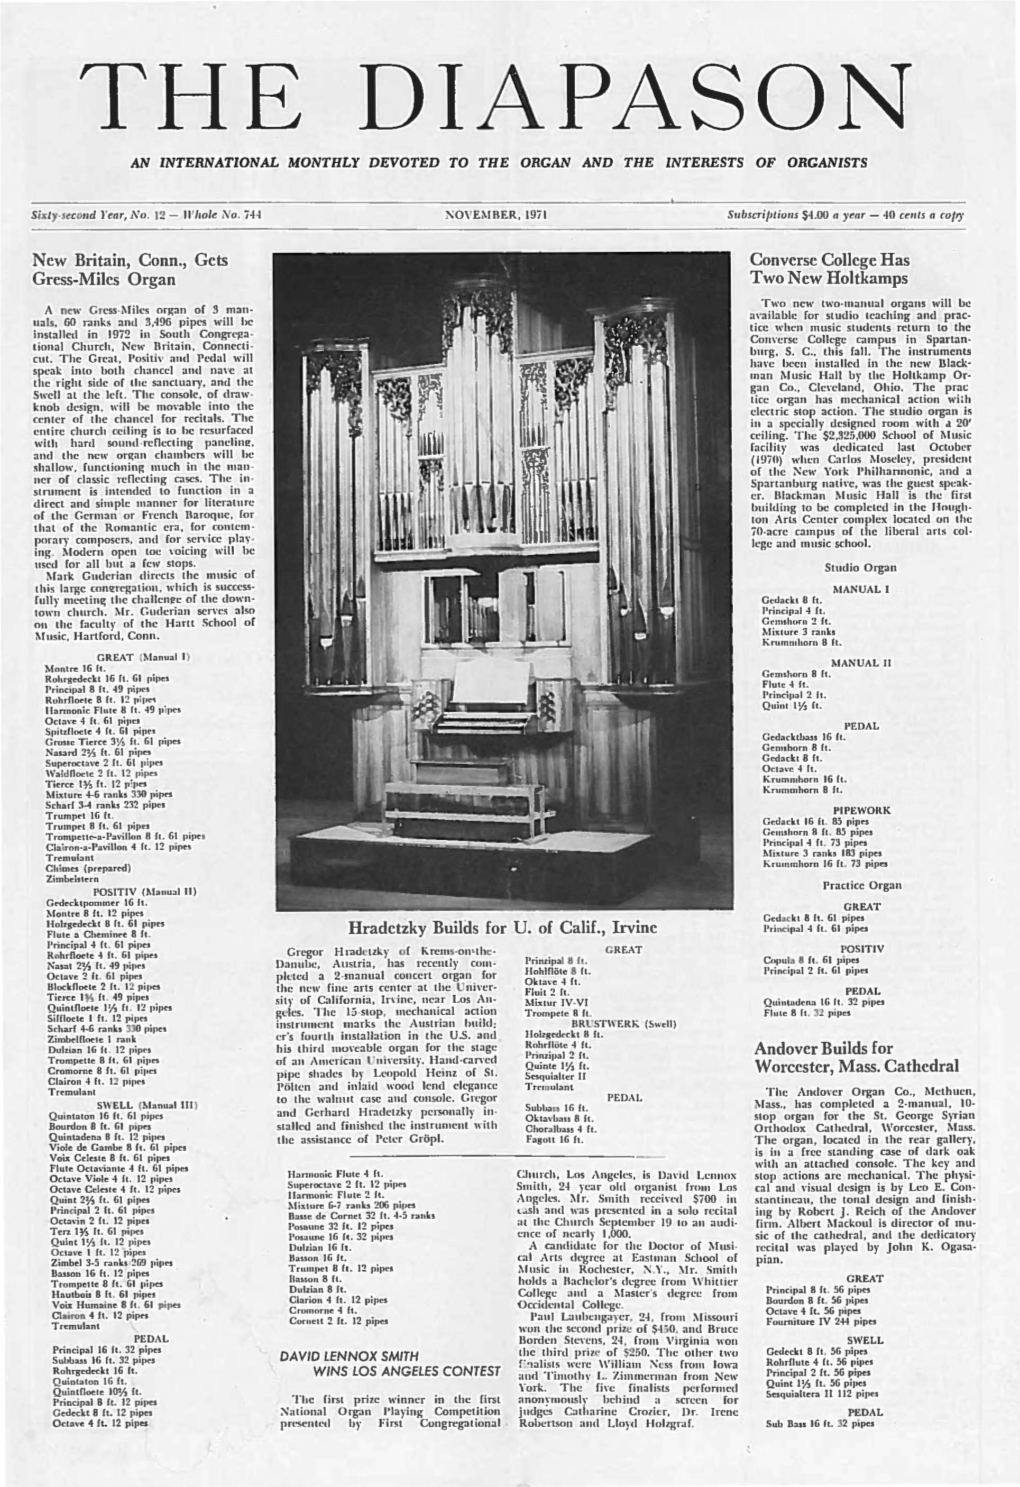 The Diapason an International Monthly Devoted to the Organ and the Interests of Organists